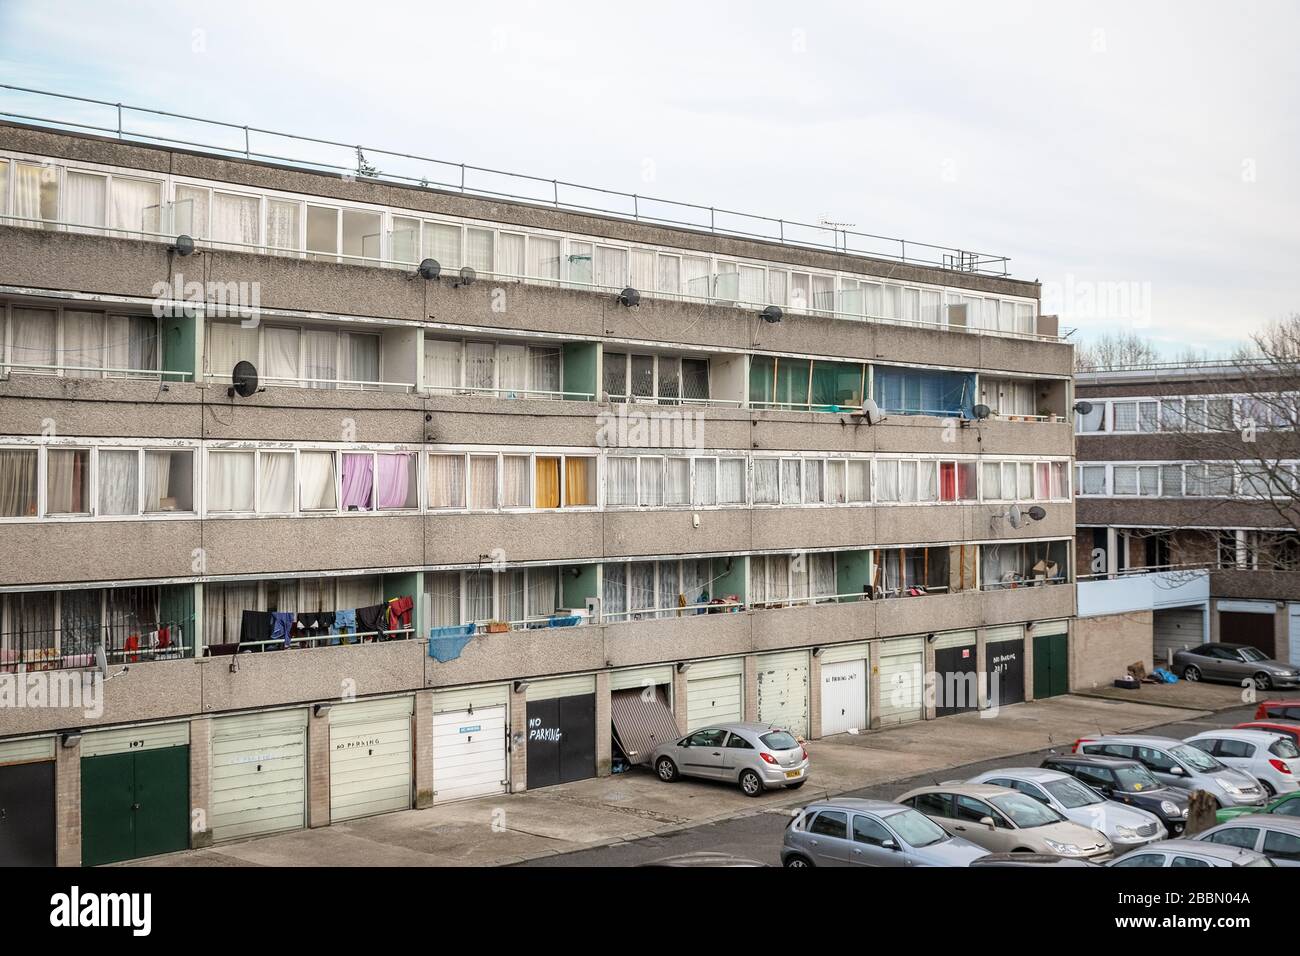 London, UK - December 9, 2019 - Communal car park next to a council block in south east London Stock Photo